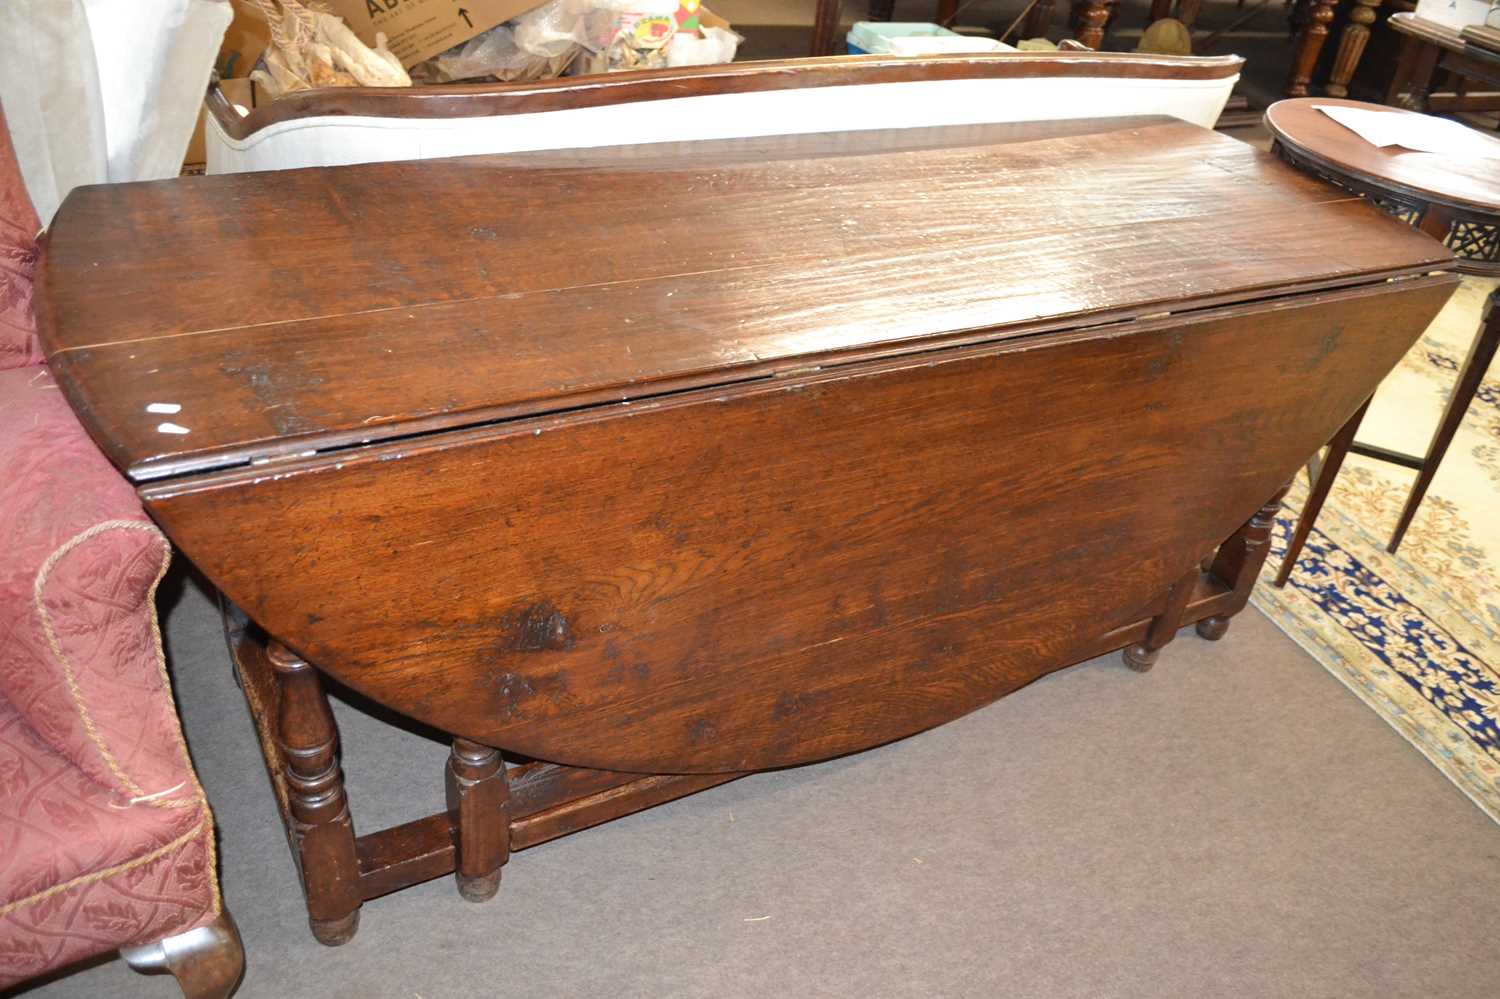 Large oak drop leaf dining or wake table in the 18th Century style with turned gate legs, probably